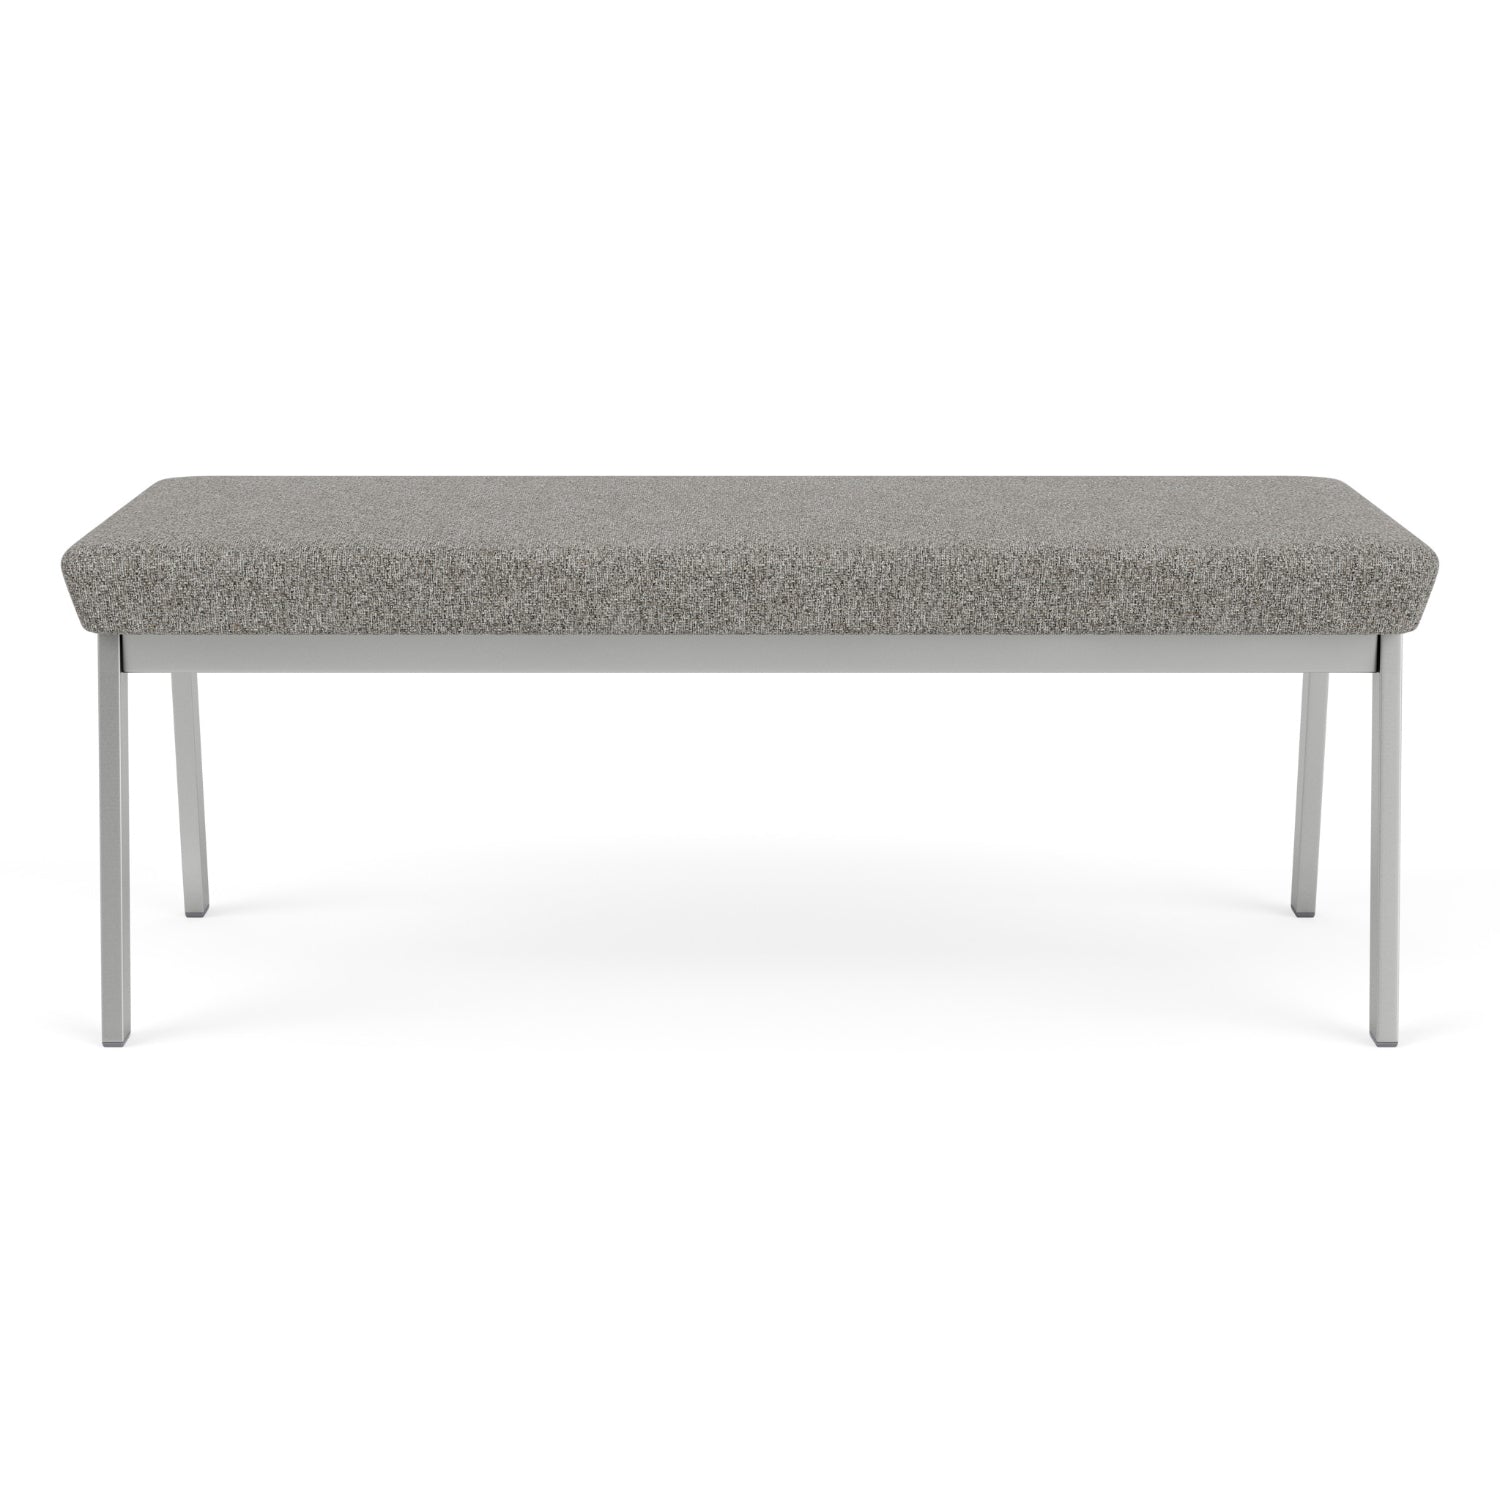 Newport Collection Reception Seating, 2 Seat Bench, Standard Fabric Upholstery, FREE SHIPPING